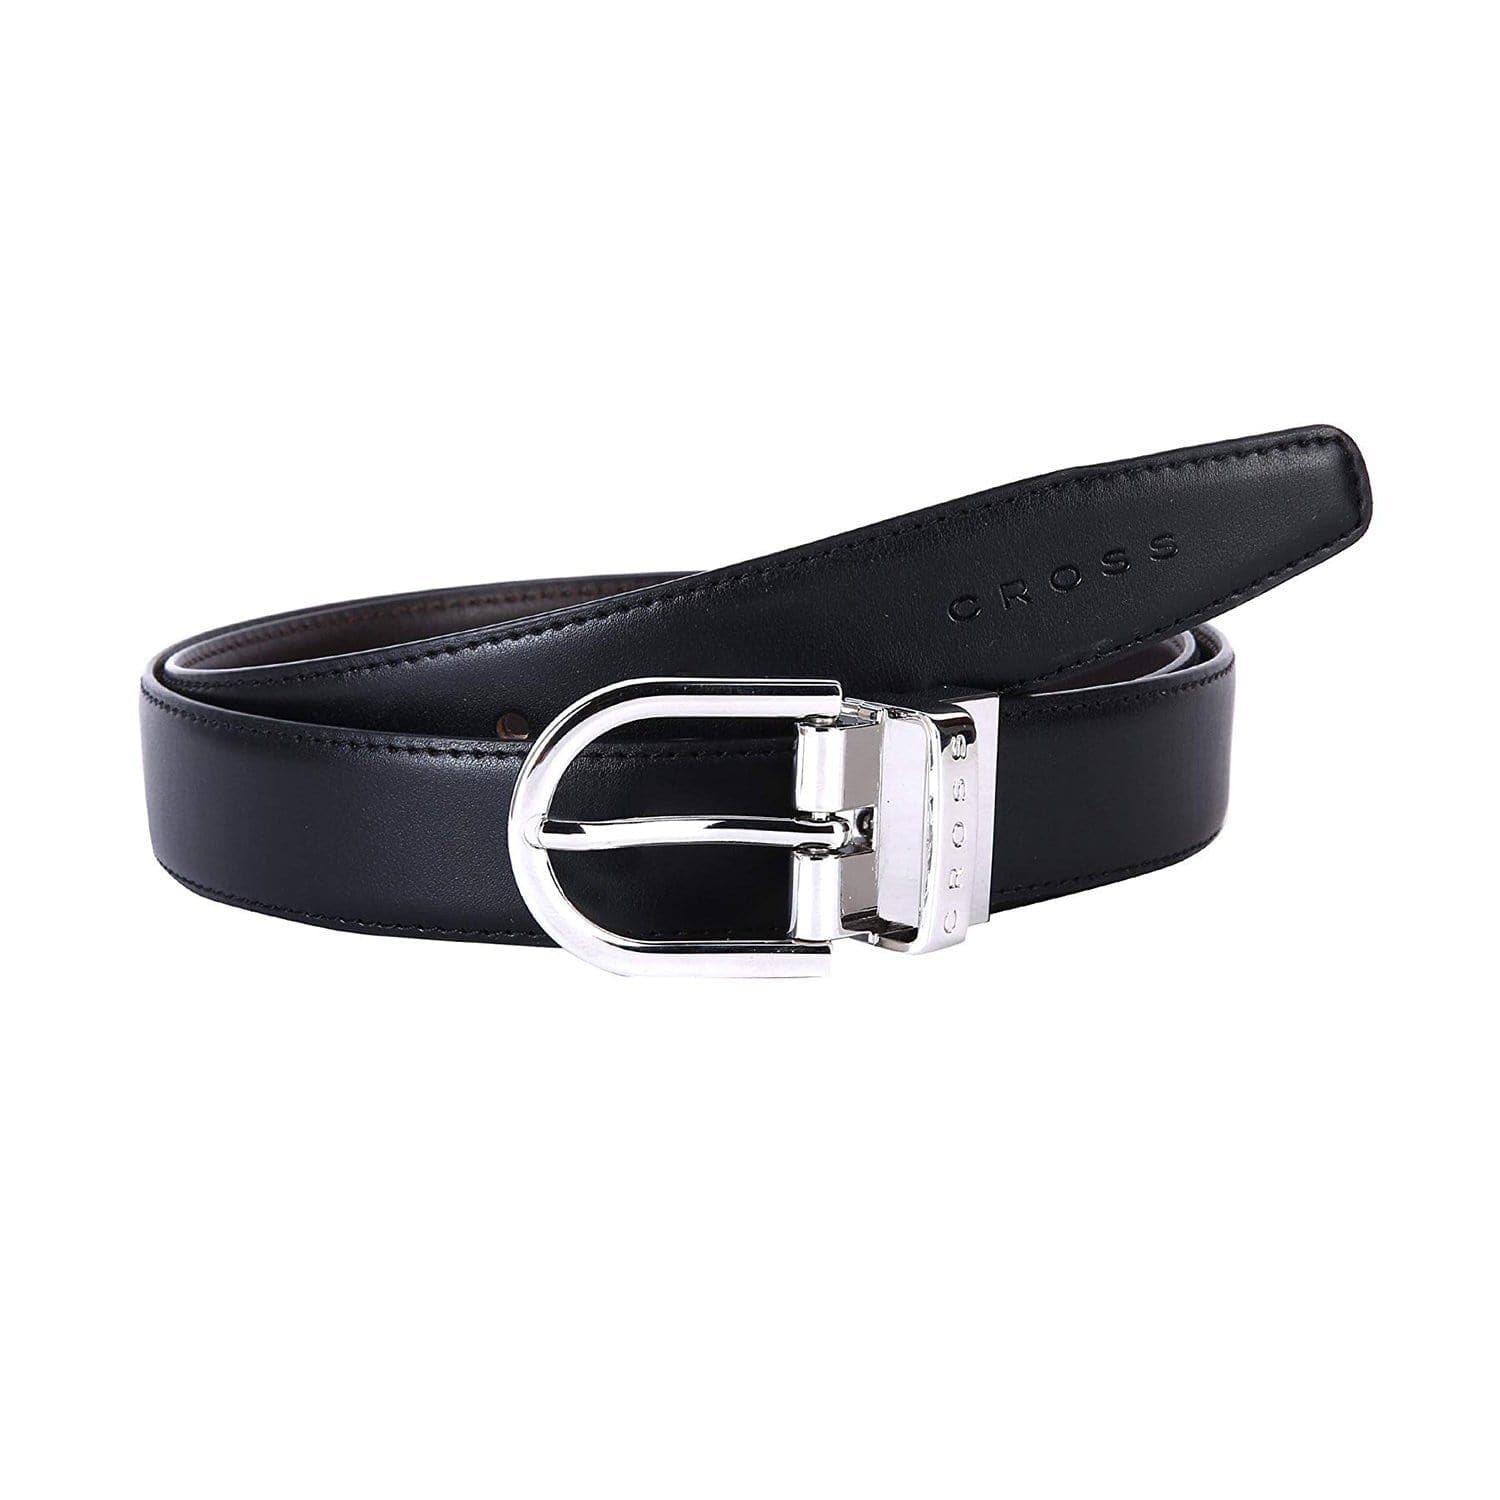 Cross Meister Premium Leather Belt with 30 mm Pronged Buckle for Men  - Black and Brown L - Jashanmal Home